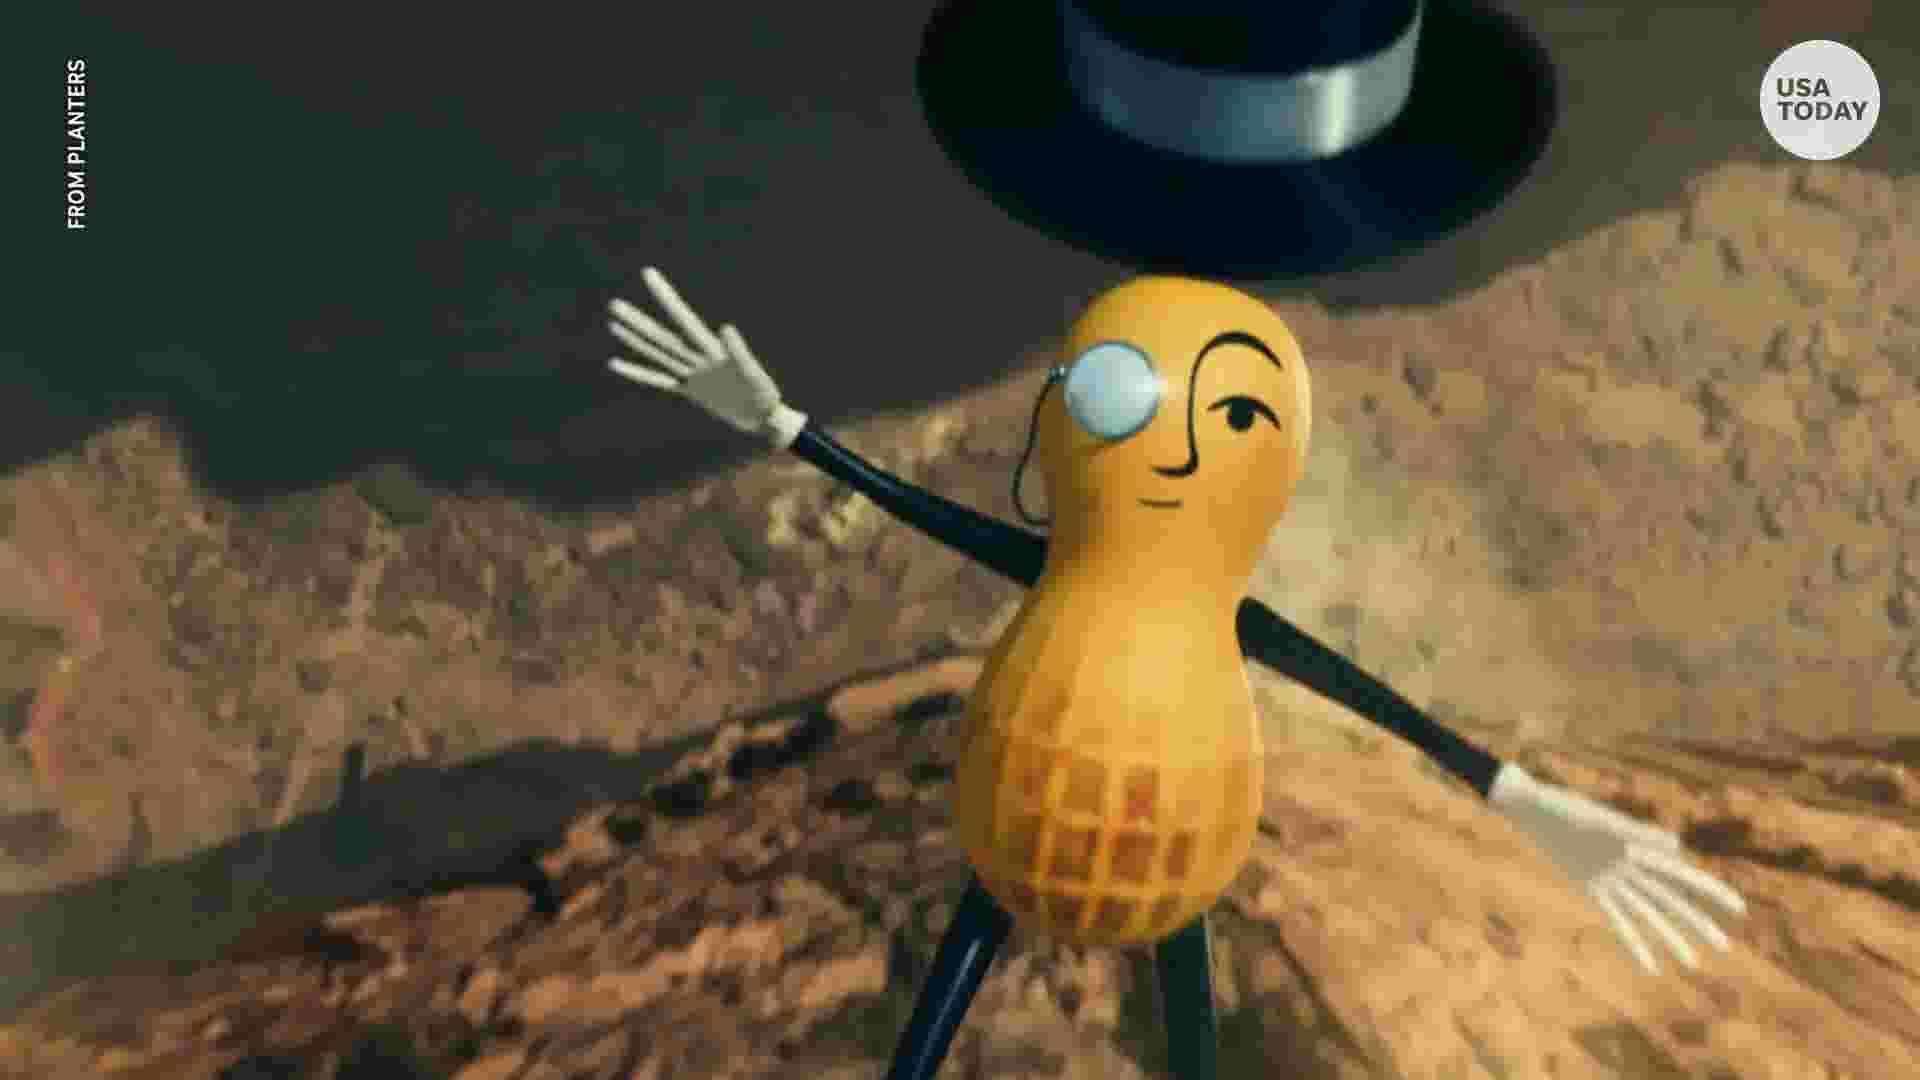 Mr. Peanut killed in Planters commercial for Super Bowl LIV campaign